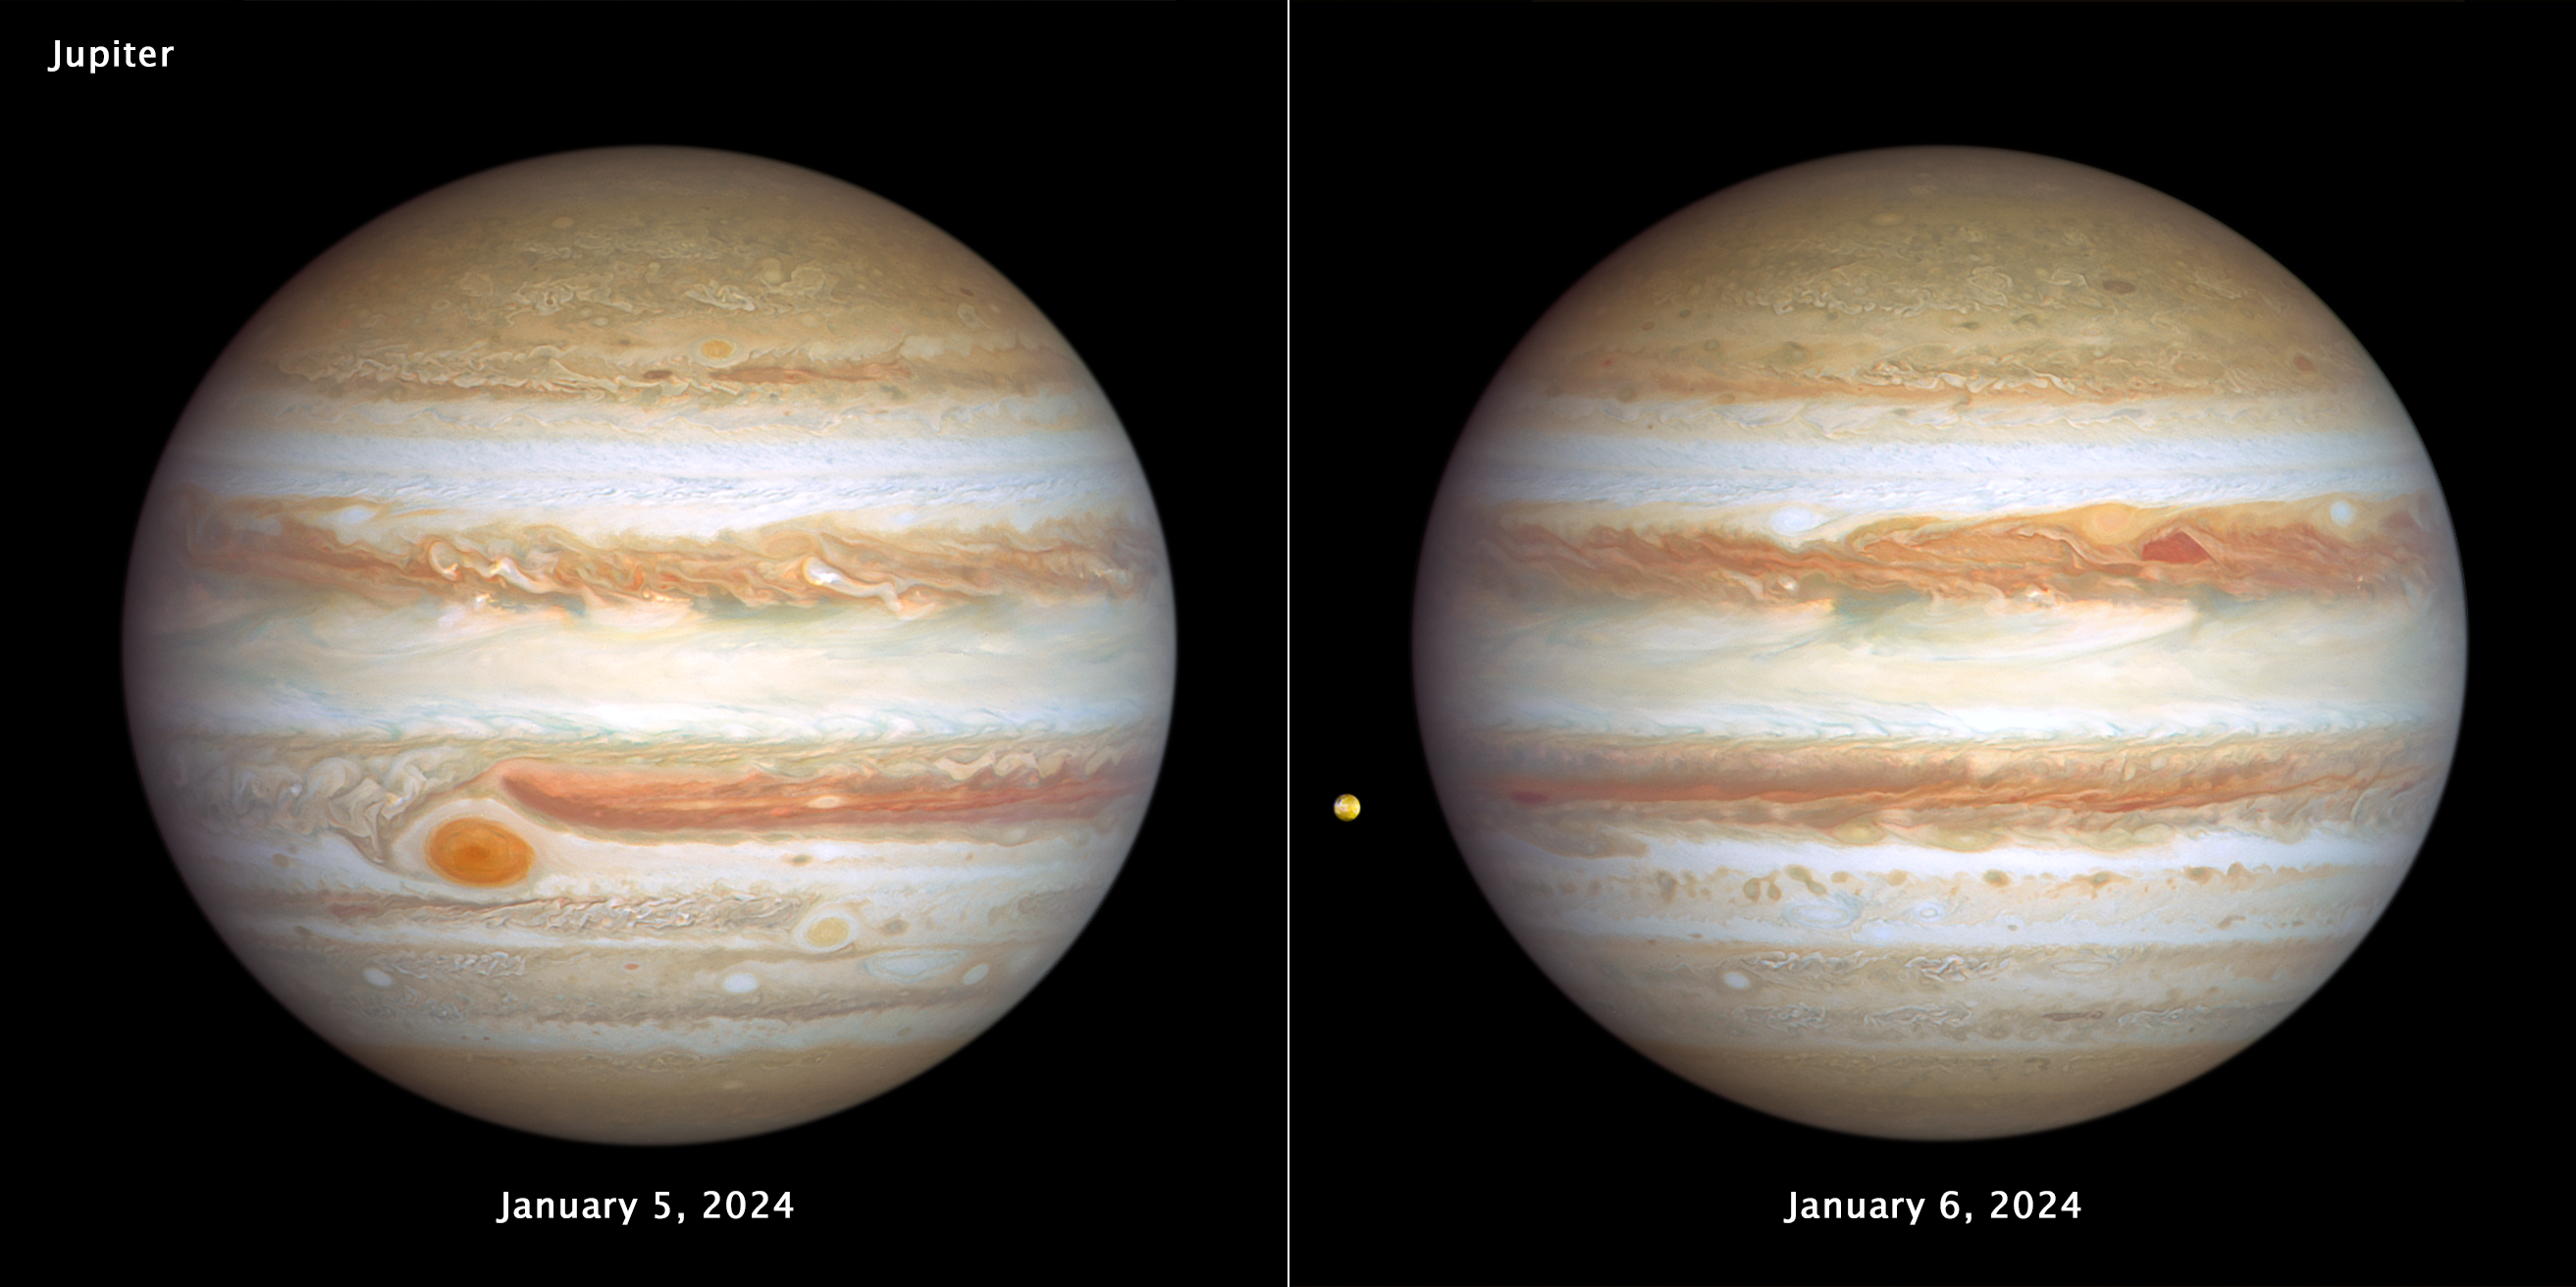 A side-by-side image showing both faces of Jupiter on the black background of space. At the top, left corner of the left-hand image is the label Jupiter. Centered at the bottom is the label "January 5, 2024." Jupiter is banded in stripes of brownish orange, light gray, soft yellow, and shades of cream, punctuated with many large storms and small white clouds. The largest storm, the Great Red Spot, is the most prominent feature in the left bottom third of this view. To its lower right is a smaller reddish anticyclone, Red Spot Jr. On the right-hand image, centered at the bottom is the label "January 6, 2024." This opposite side of Jupiter is also banded in stripes of brownish orange, light gray, soft yellow, and shades of cream, with many large storms and small white clouds punctuating the planet. At upper right of center, a pair of storms appear next to each other: a deep-red, triangle-shaped cyclone and a reddish anticyclone. Toward the far-left edge of this view is Jupiter's tiny orange-colored moon Io.